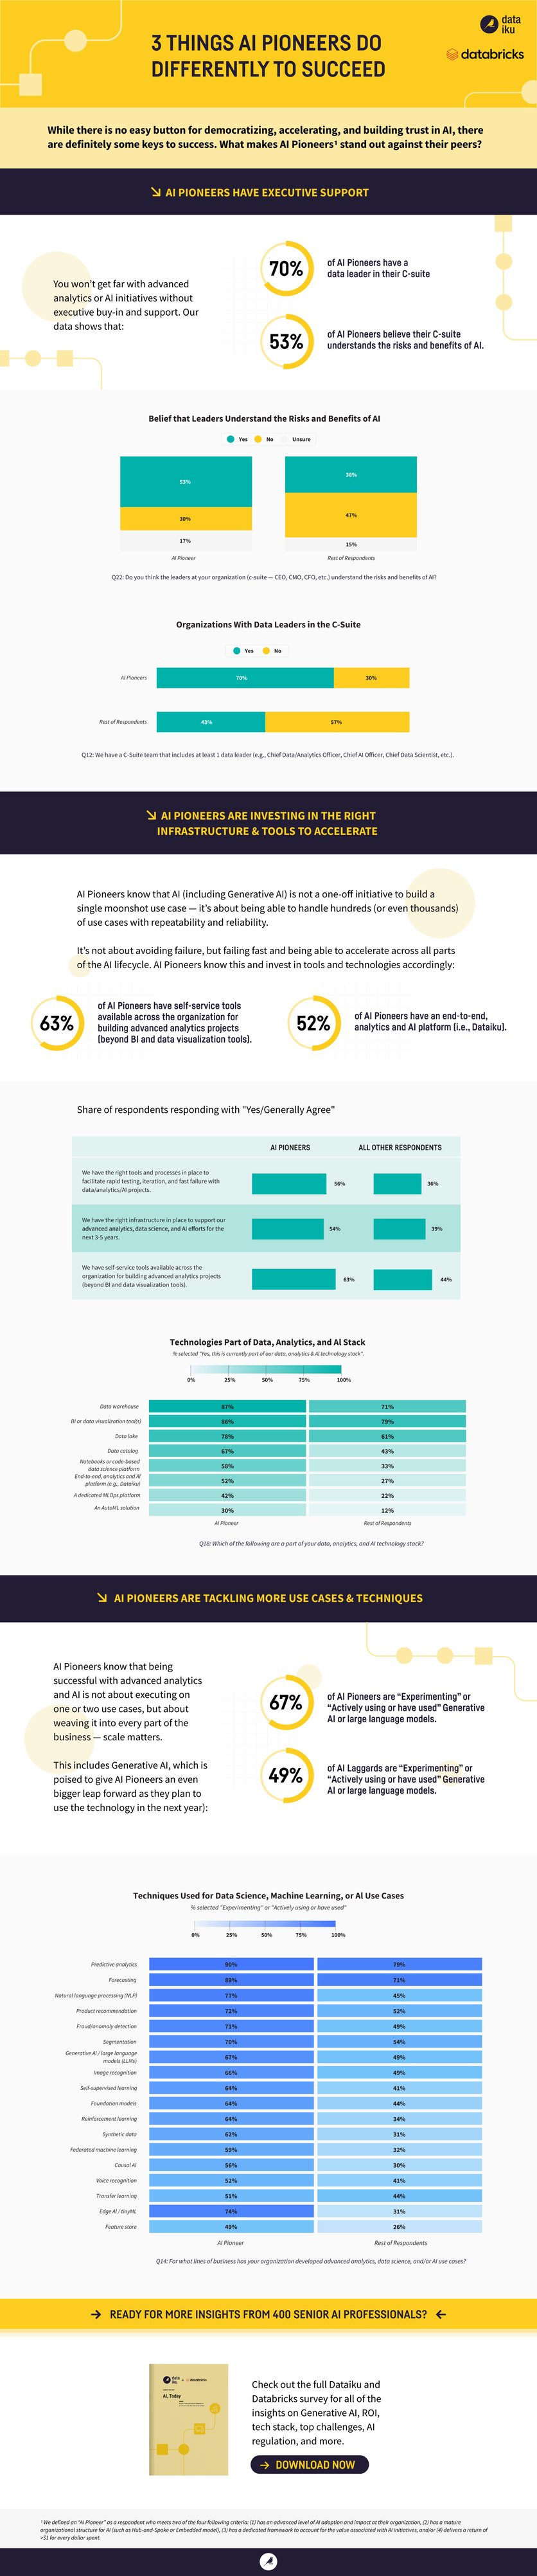 GM3364-DAC Data Leaders Survey Infographic